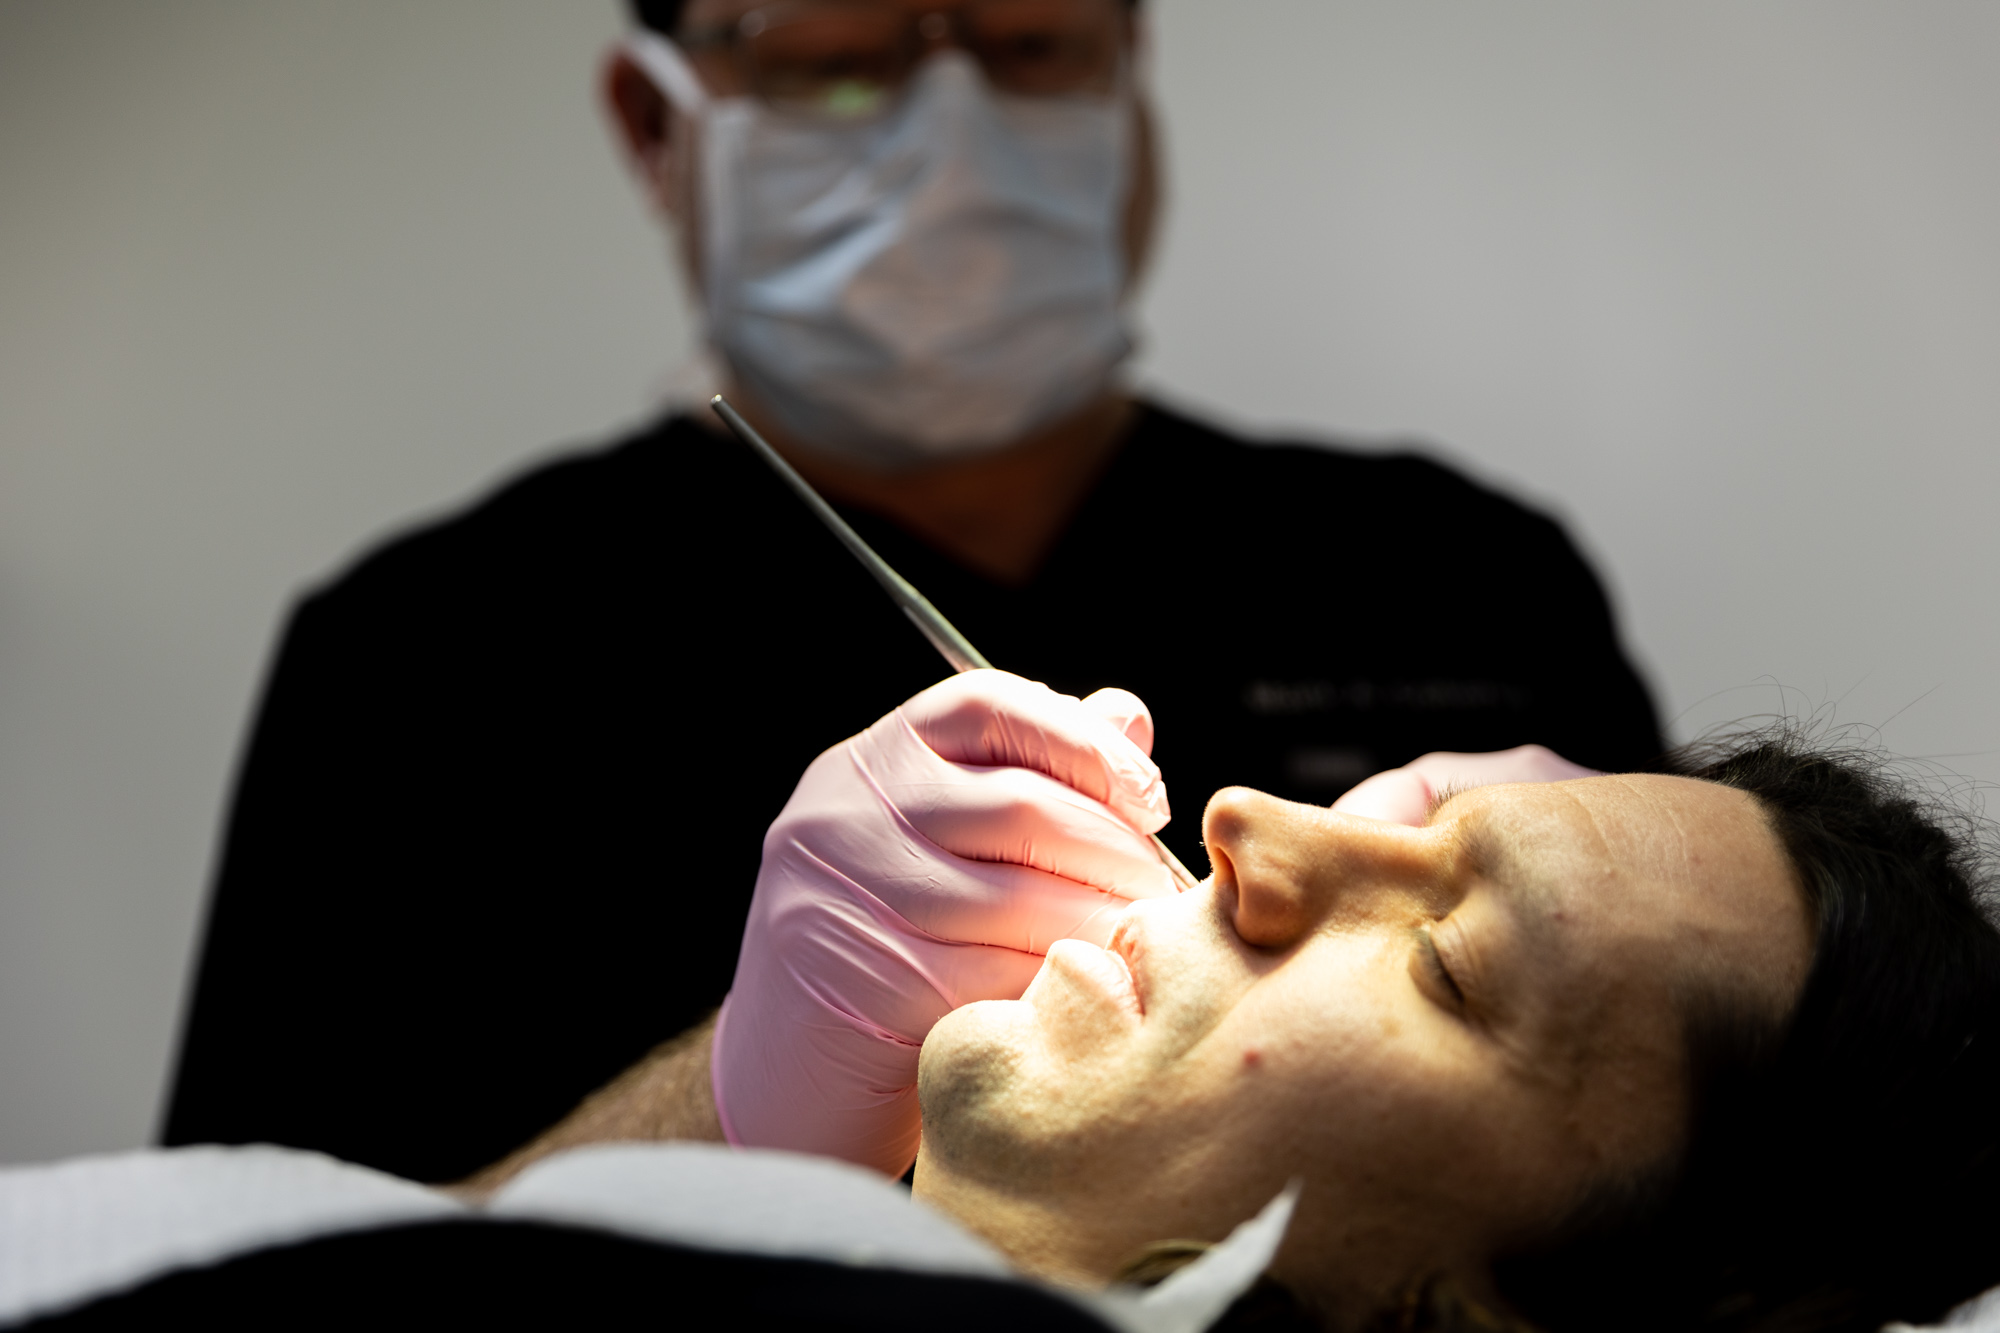 A male Kansas City Skin and Cancer Center provider performs a Mohs surgery on a paitent. Image is taken from the left side of the patient, so actual surgery is not visible as the doctor is workin on the right side of the face.